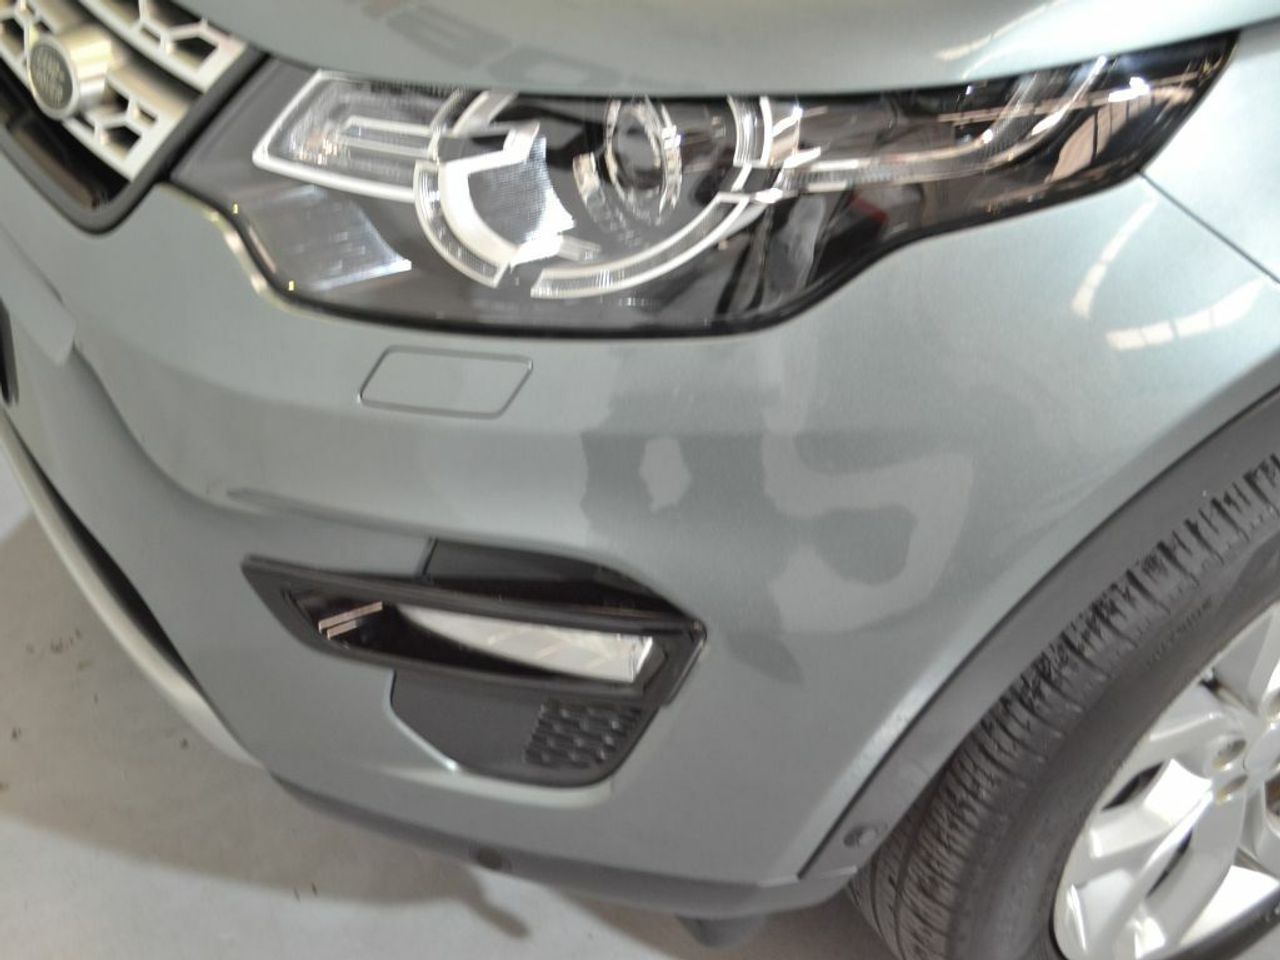 Foto Land-Rover Discovery Sport 35